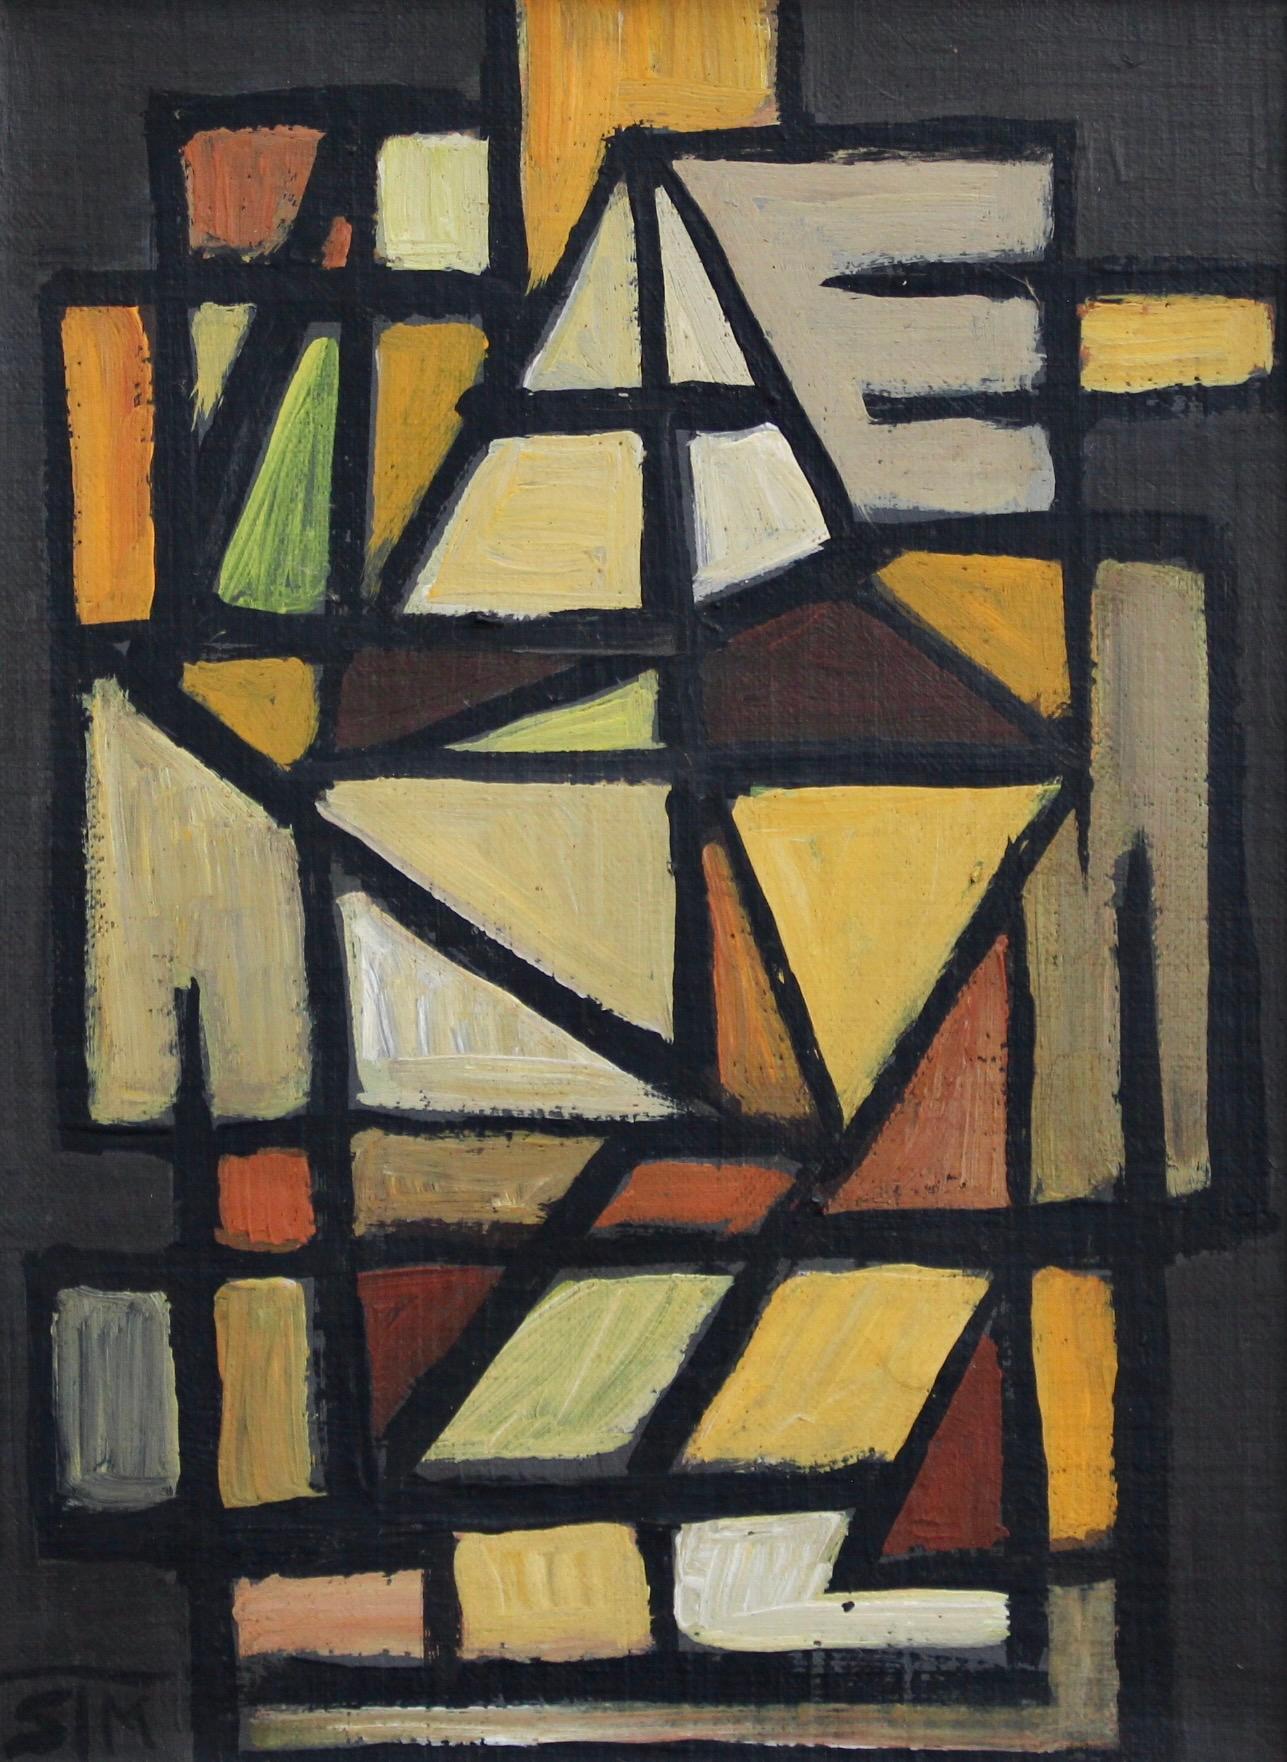 'The Android', oil on canvas, by STM (circa 1960s). A vibrant modern painting inspired by Picasso and Braque, the artist uses angles, lines and colour to create an entirely new dimension to painting. Cubists abandoned perspective and realism,